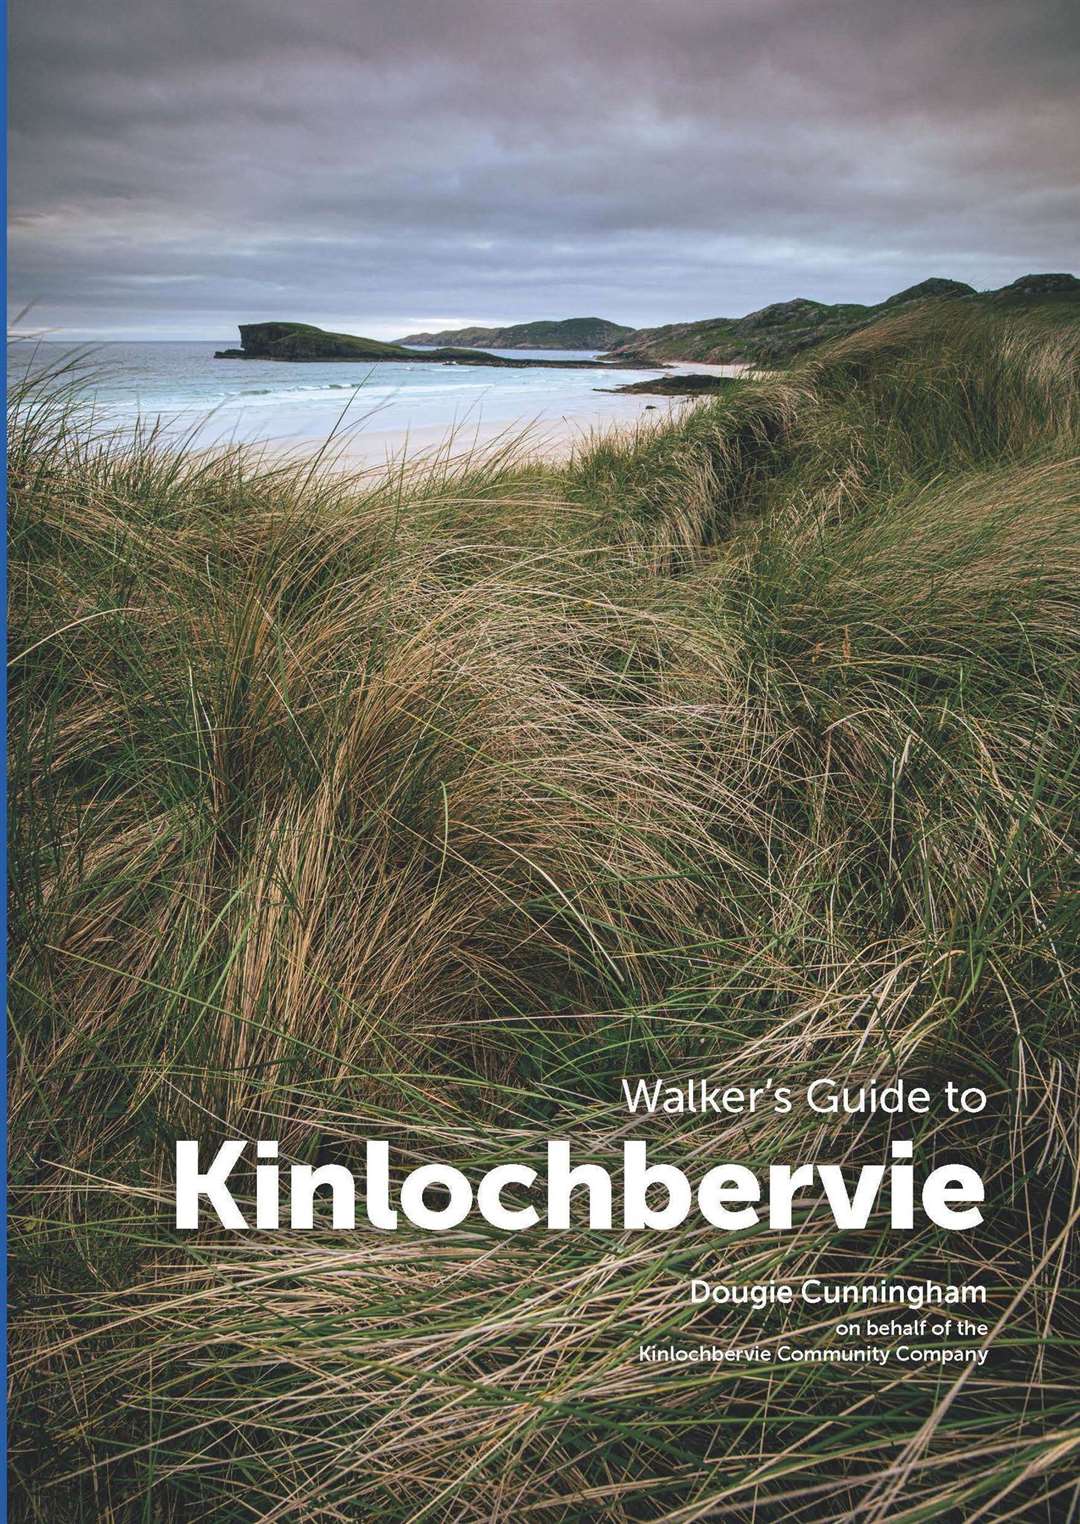 The front cover of the Walkers' Guide to Kinlochbervie